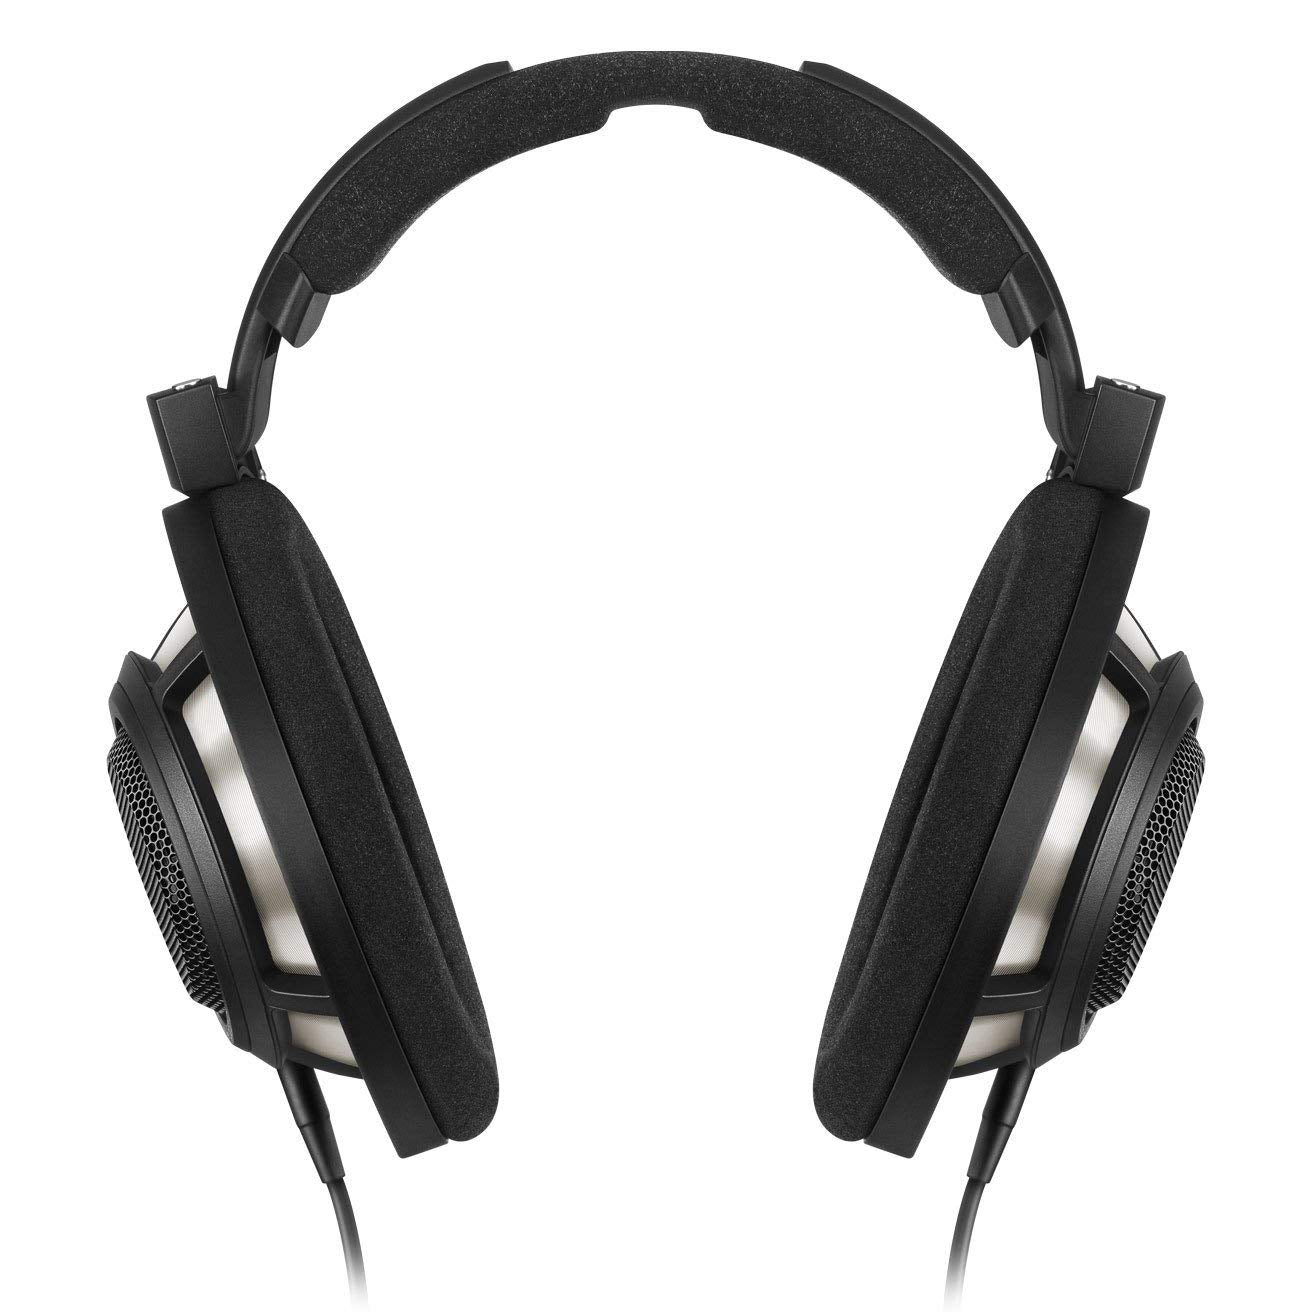 Sennheiser HD 800s Wired On Ear Headphones Without Mic Black